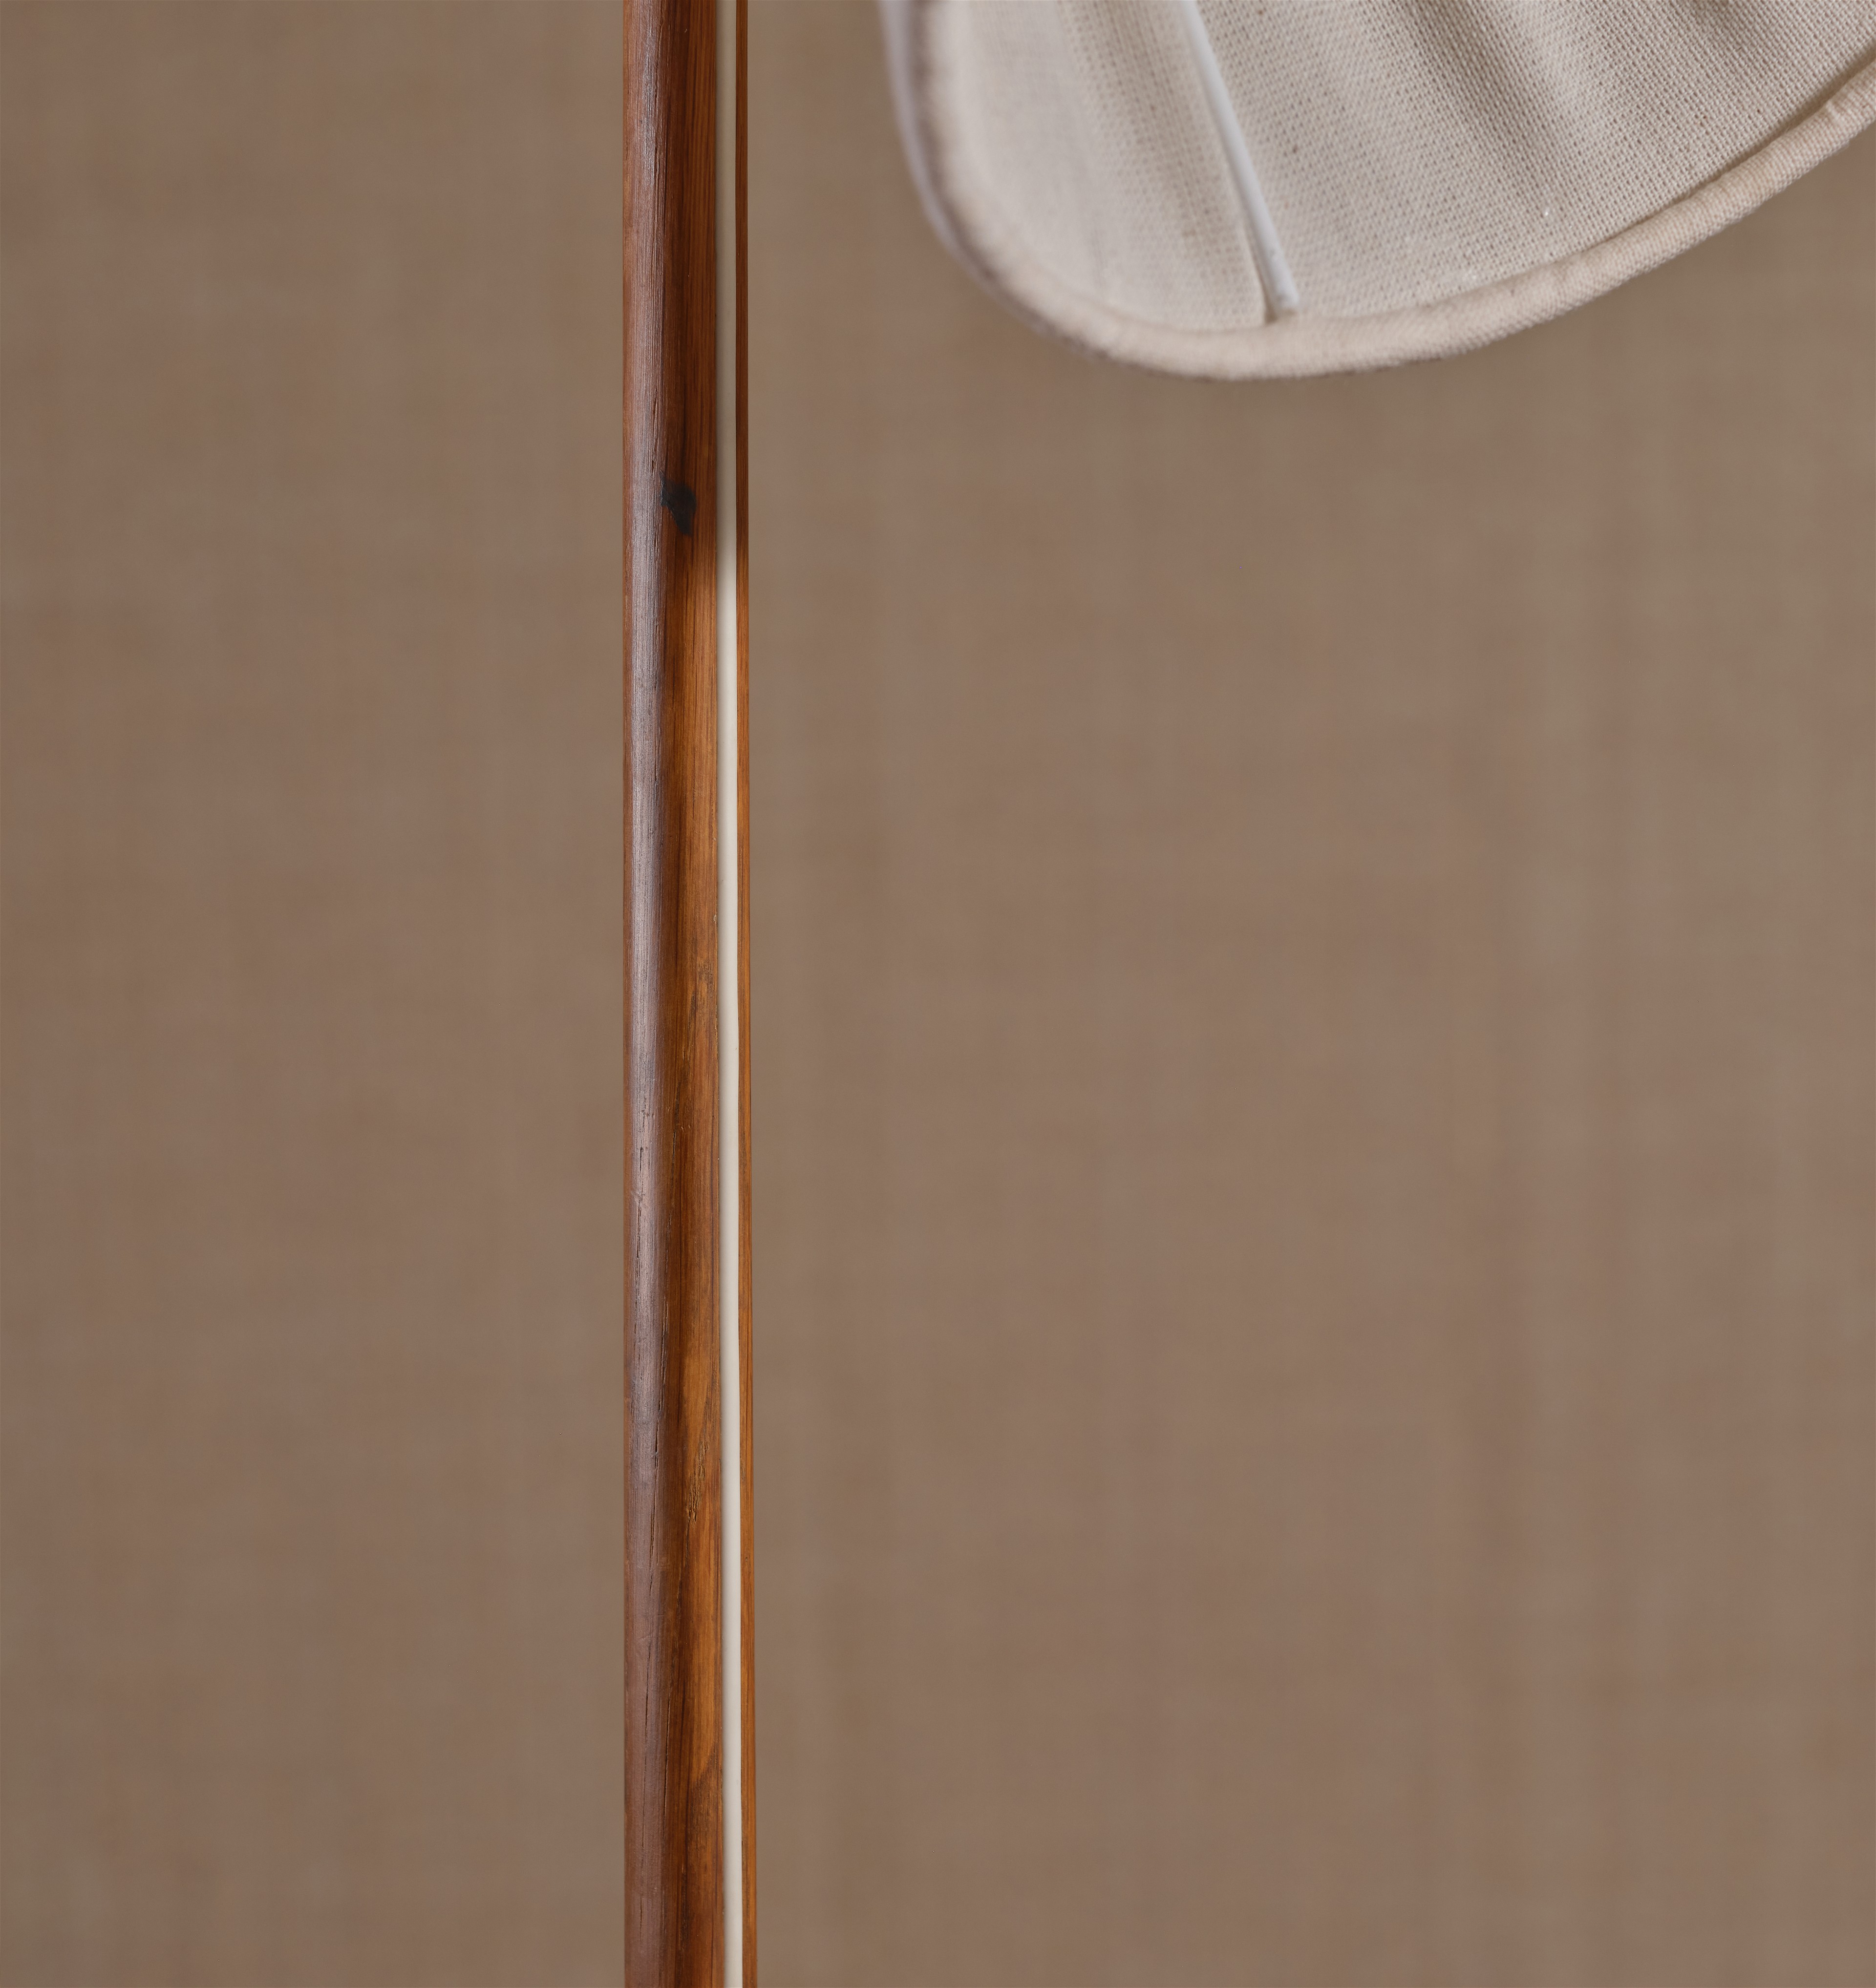 a close up of a wooden pole with a hat on top of it